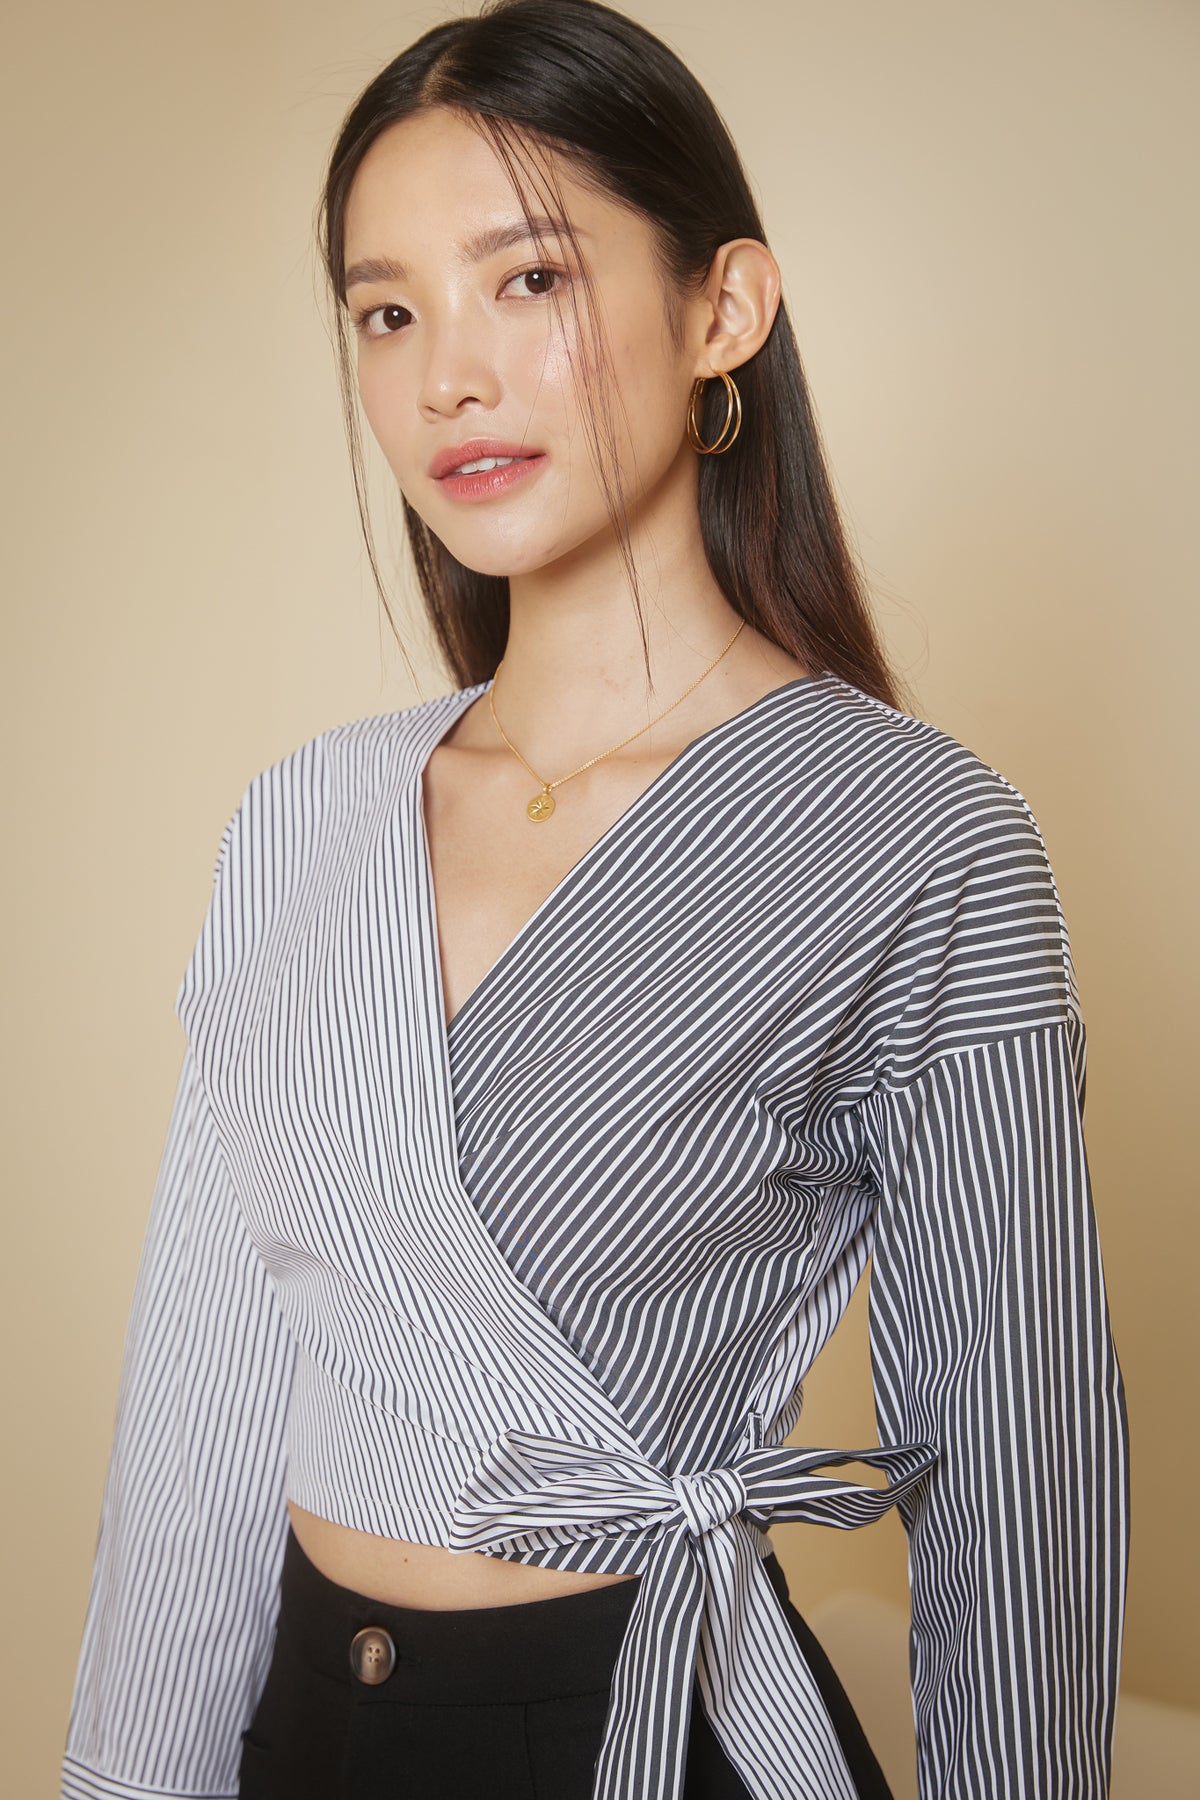 Duo-Tone Striped Sleeved Wrap Top in Black